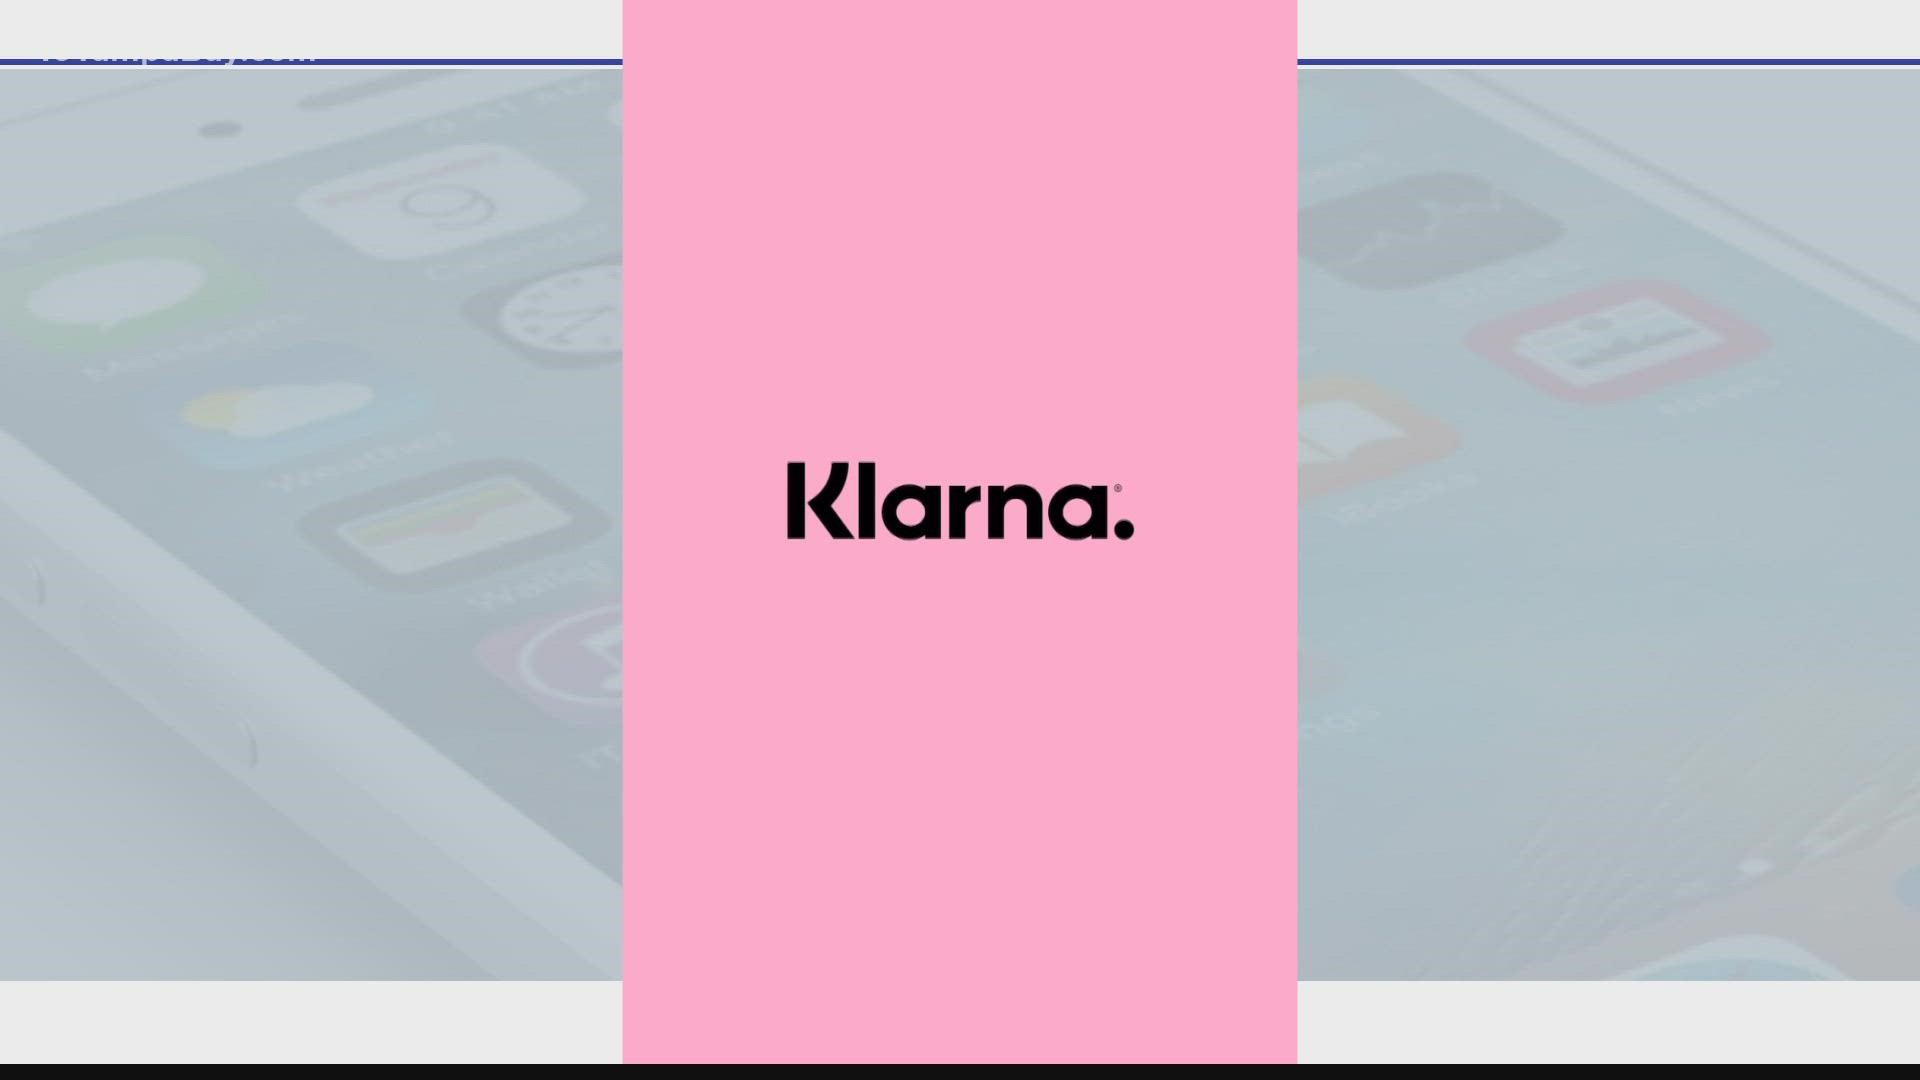 Apps like Klarna and Sezzle allow shoppers to divide payments into a bi-weekly schedule.